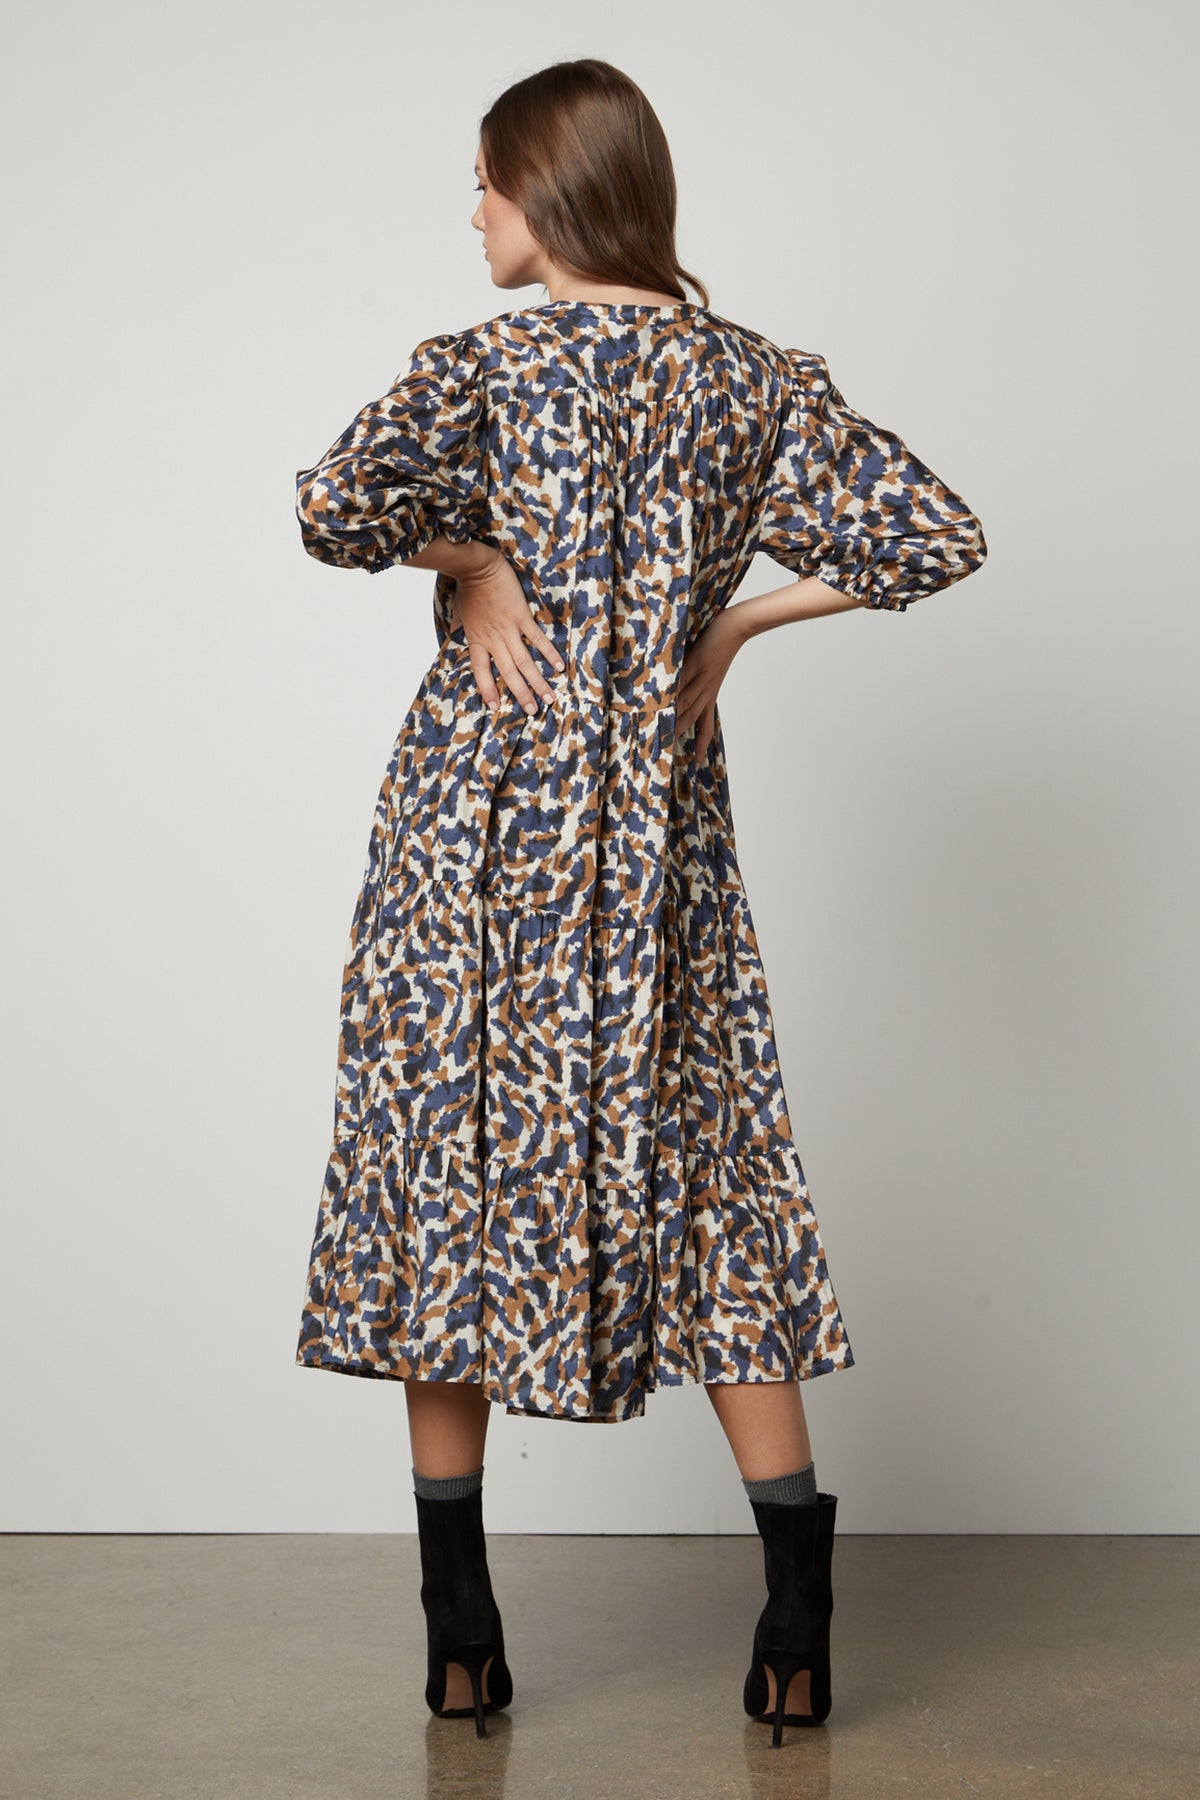   The back view of a woman wearing Velvet by Graham & Spencer's OTTILIE PRINTED BOHO DRESS with elastic cuffs. 